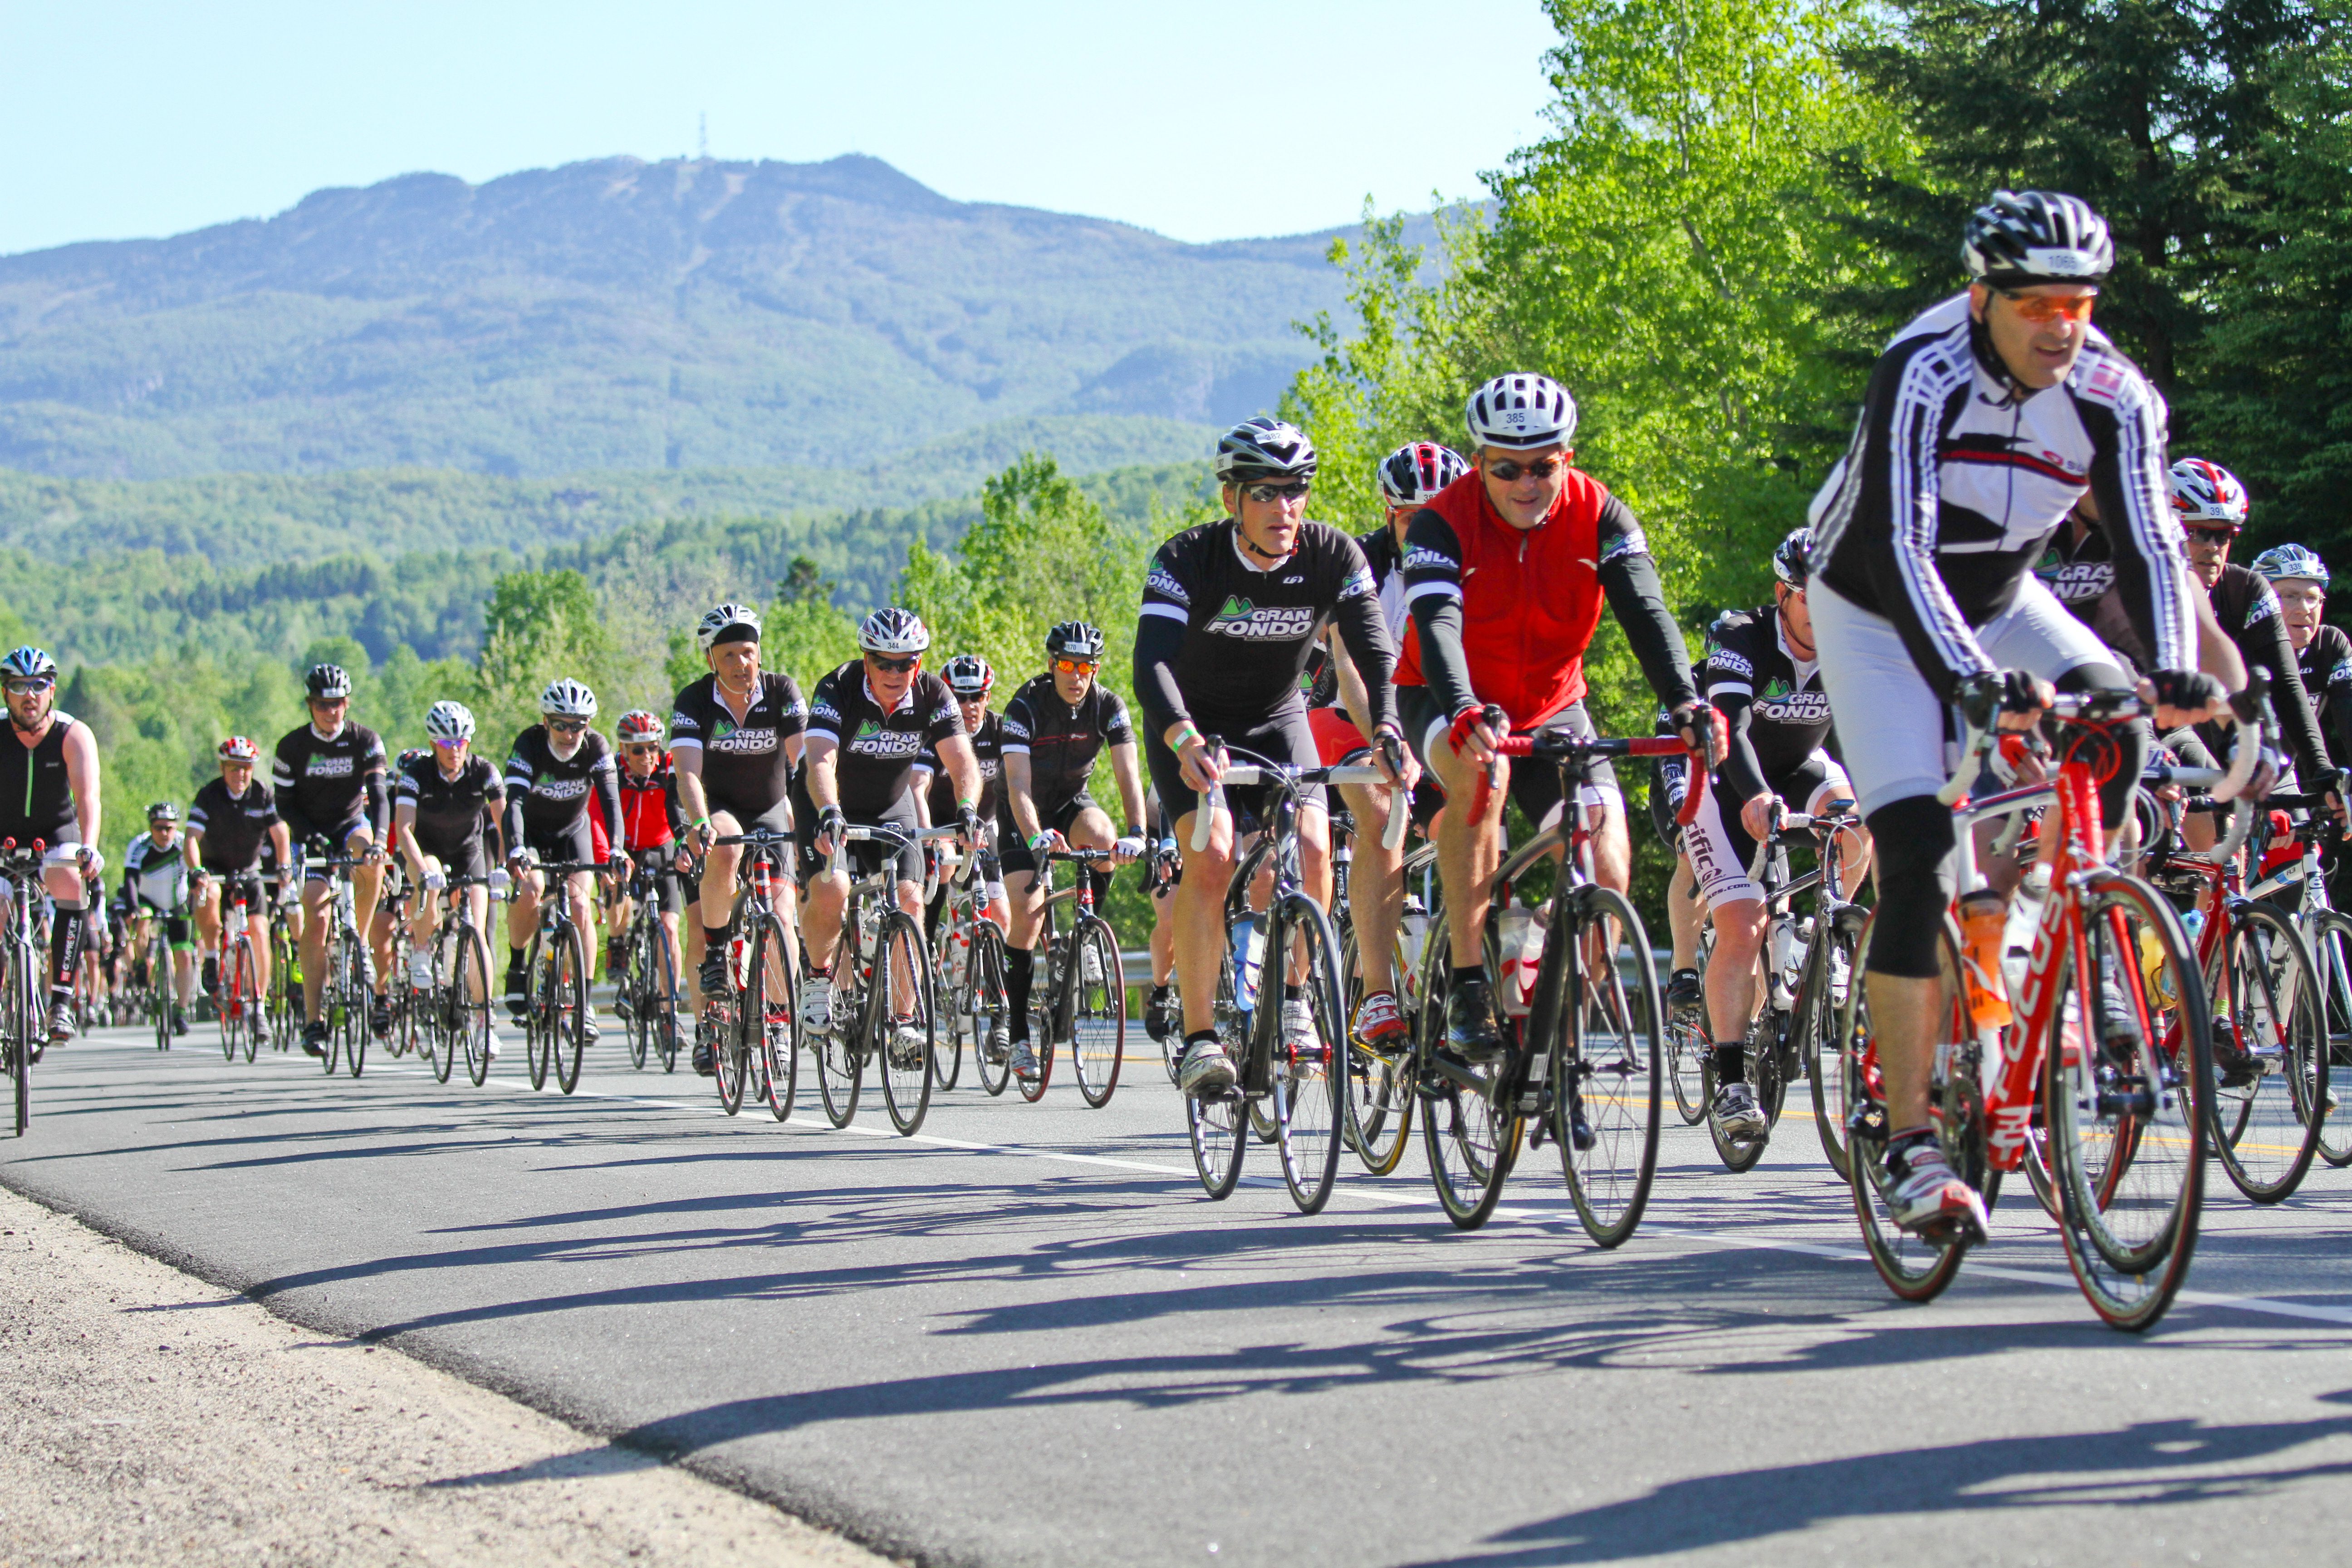 5 Tips For First Time Gran Fondo Riders Canadian Cycling Magazine within The Elegant and also Interesting cycling tips gran fondo pertaining to Motivate